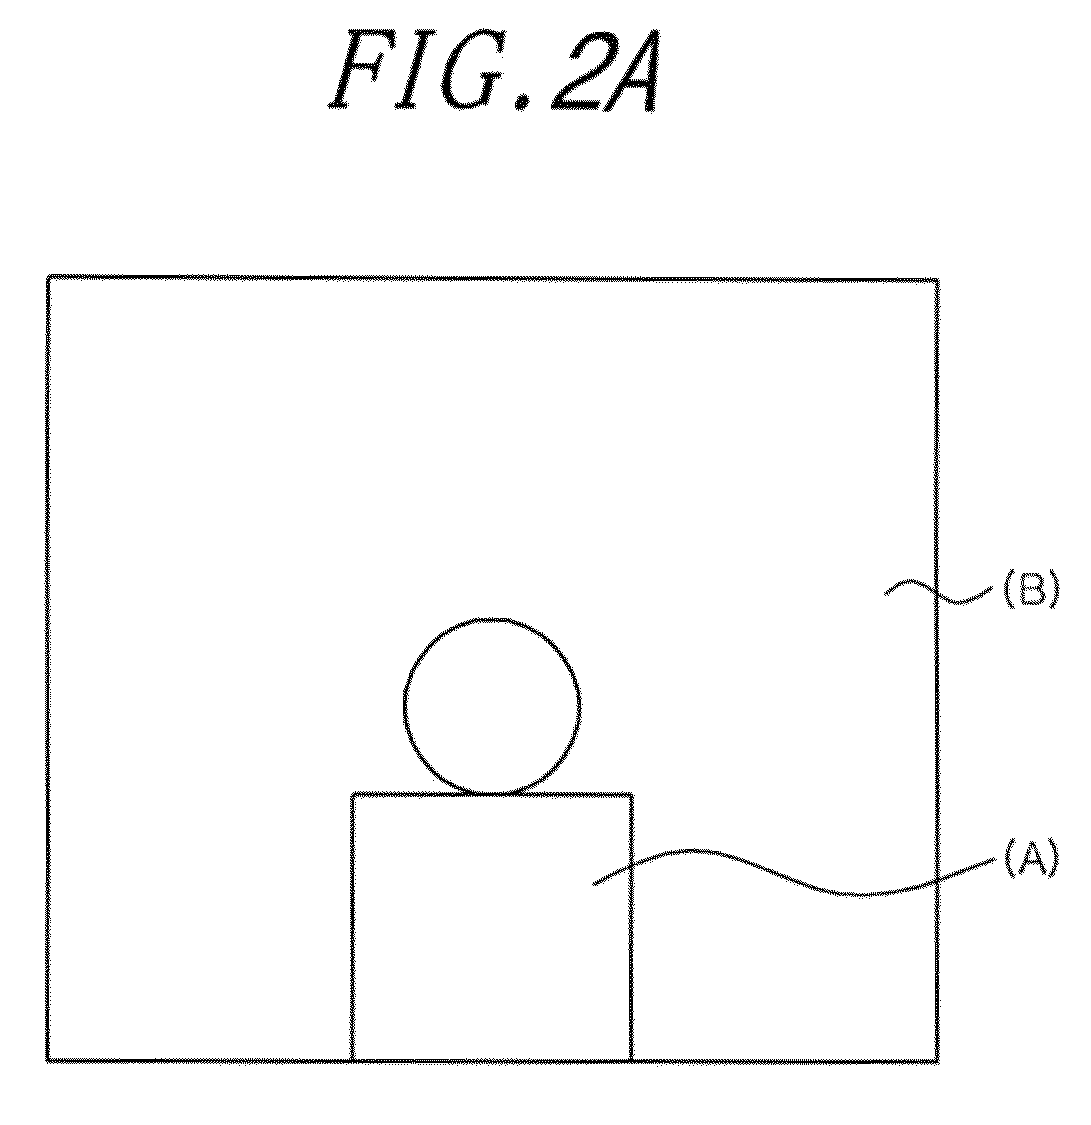 Apparatus and method for modulating images for videotelephony